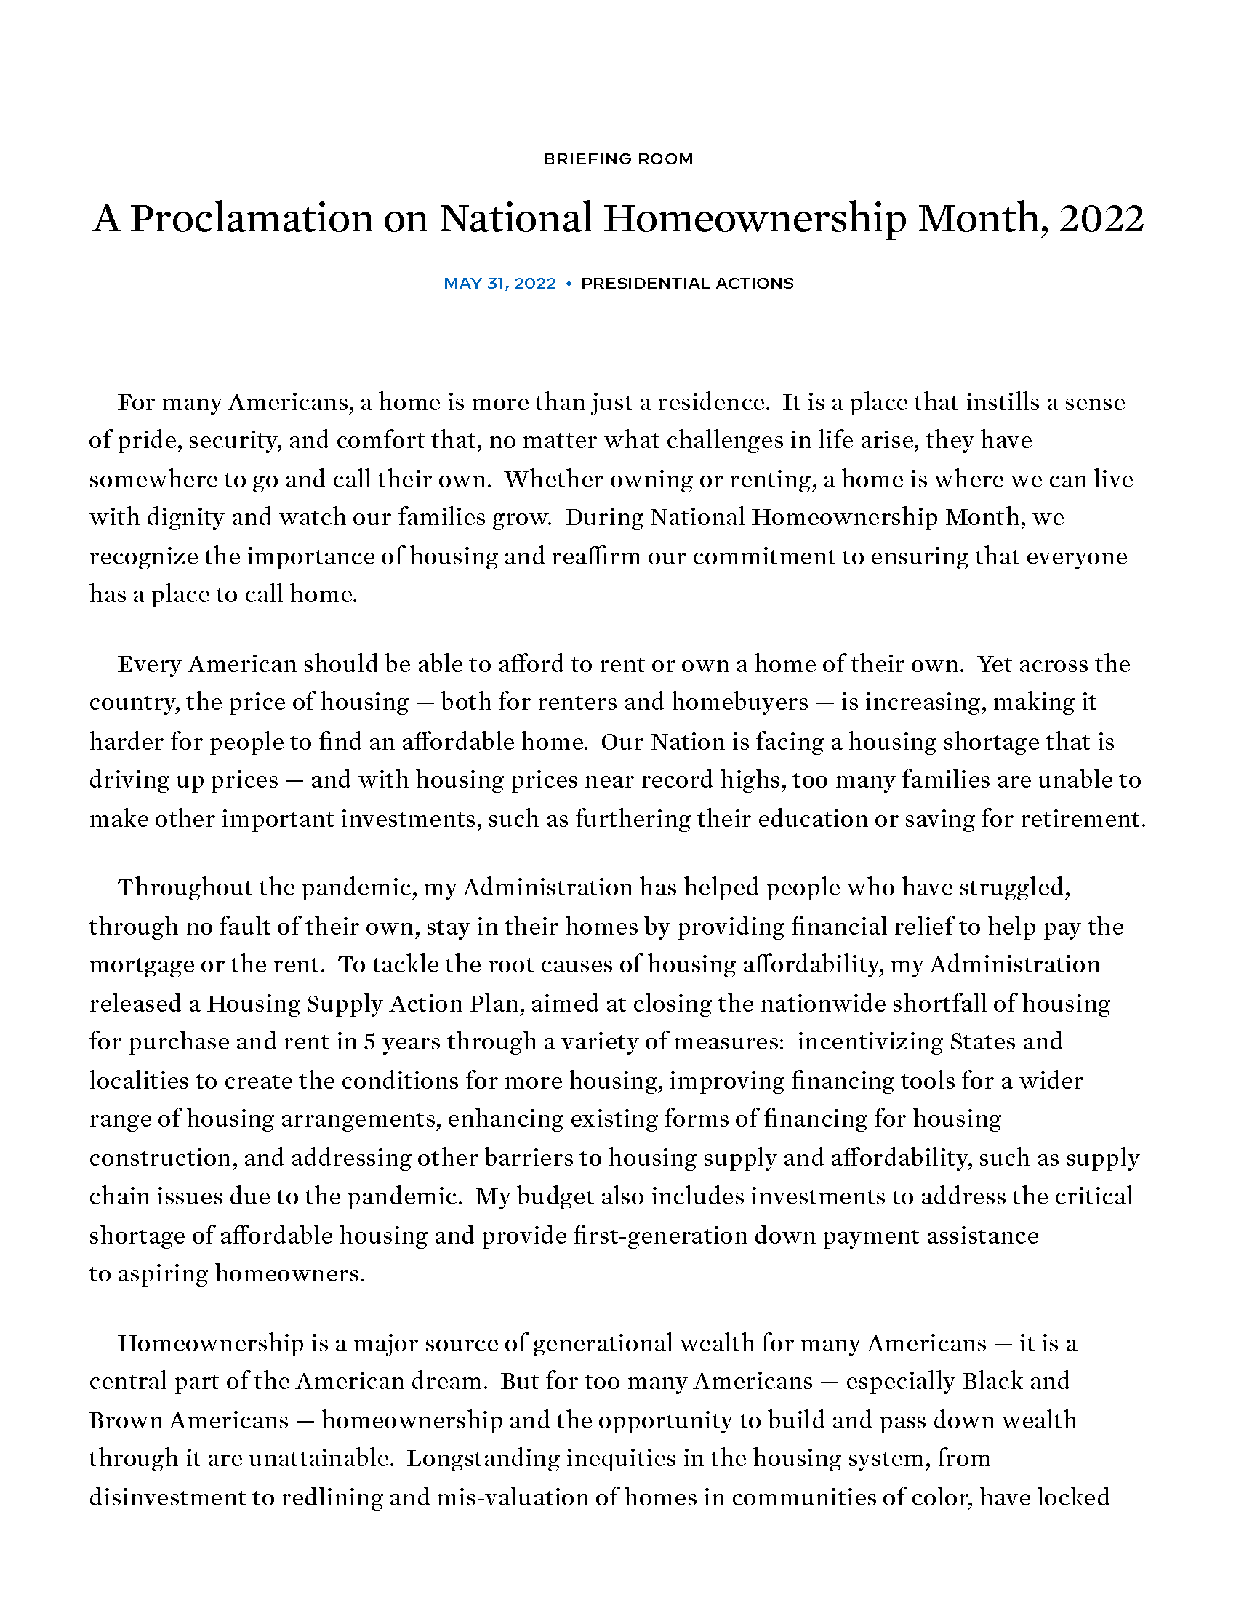 A Proclamation on National Homeownership Month 2022 _ The White House_Page_1